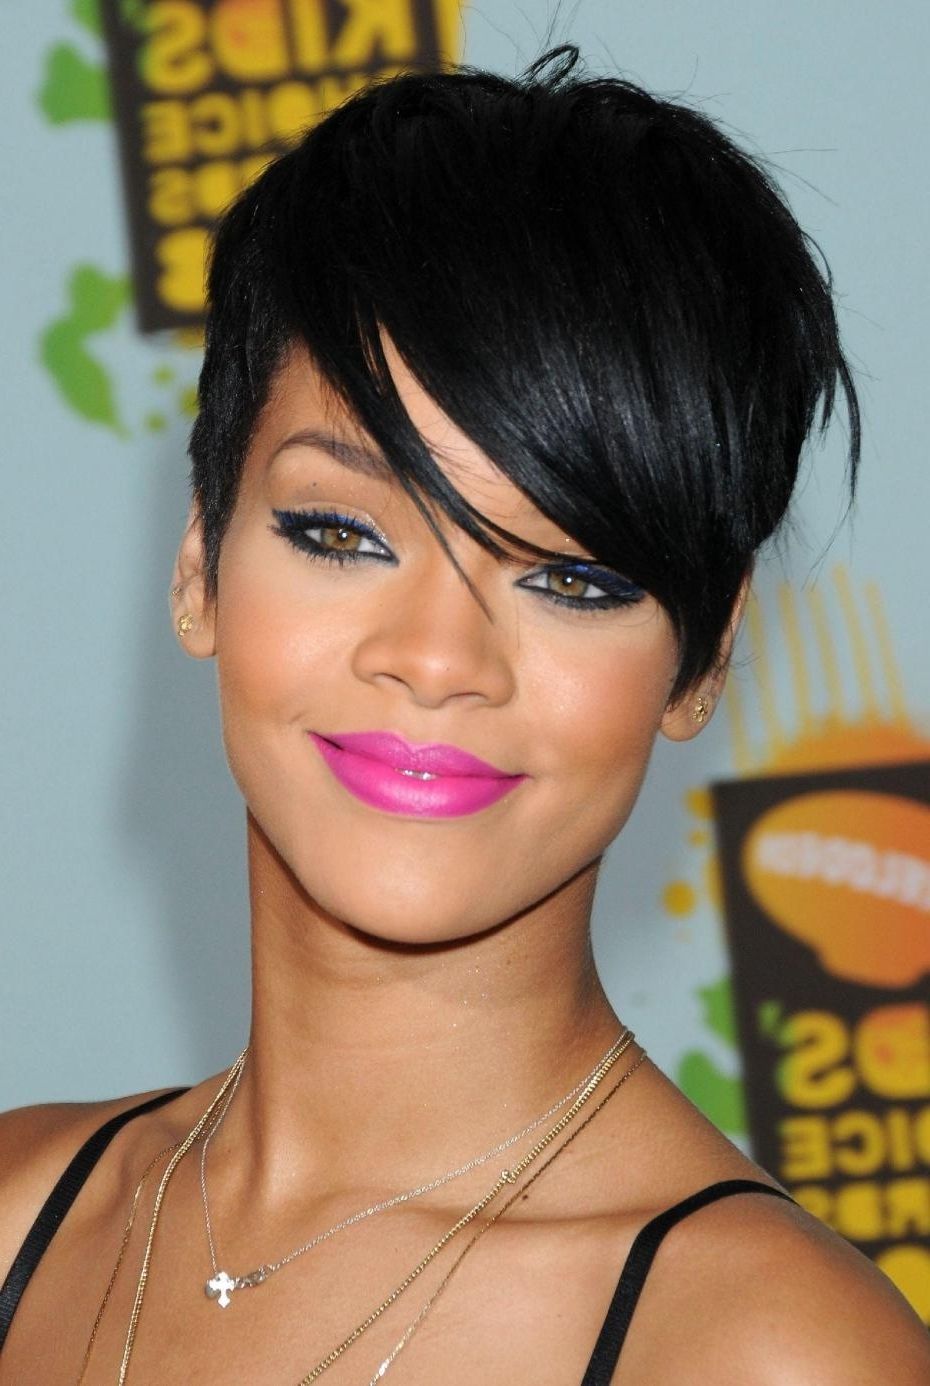 Rihanna Featuring A Pixie Haircut – Women Hairstyles Pertaining To Most Recent Rihanna Pixie Hairstyles (View 10 of 15)